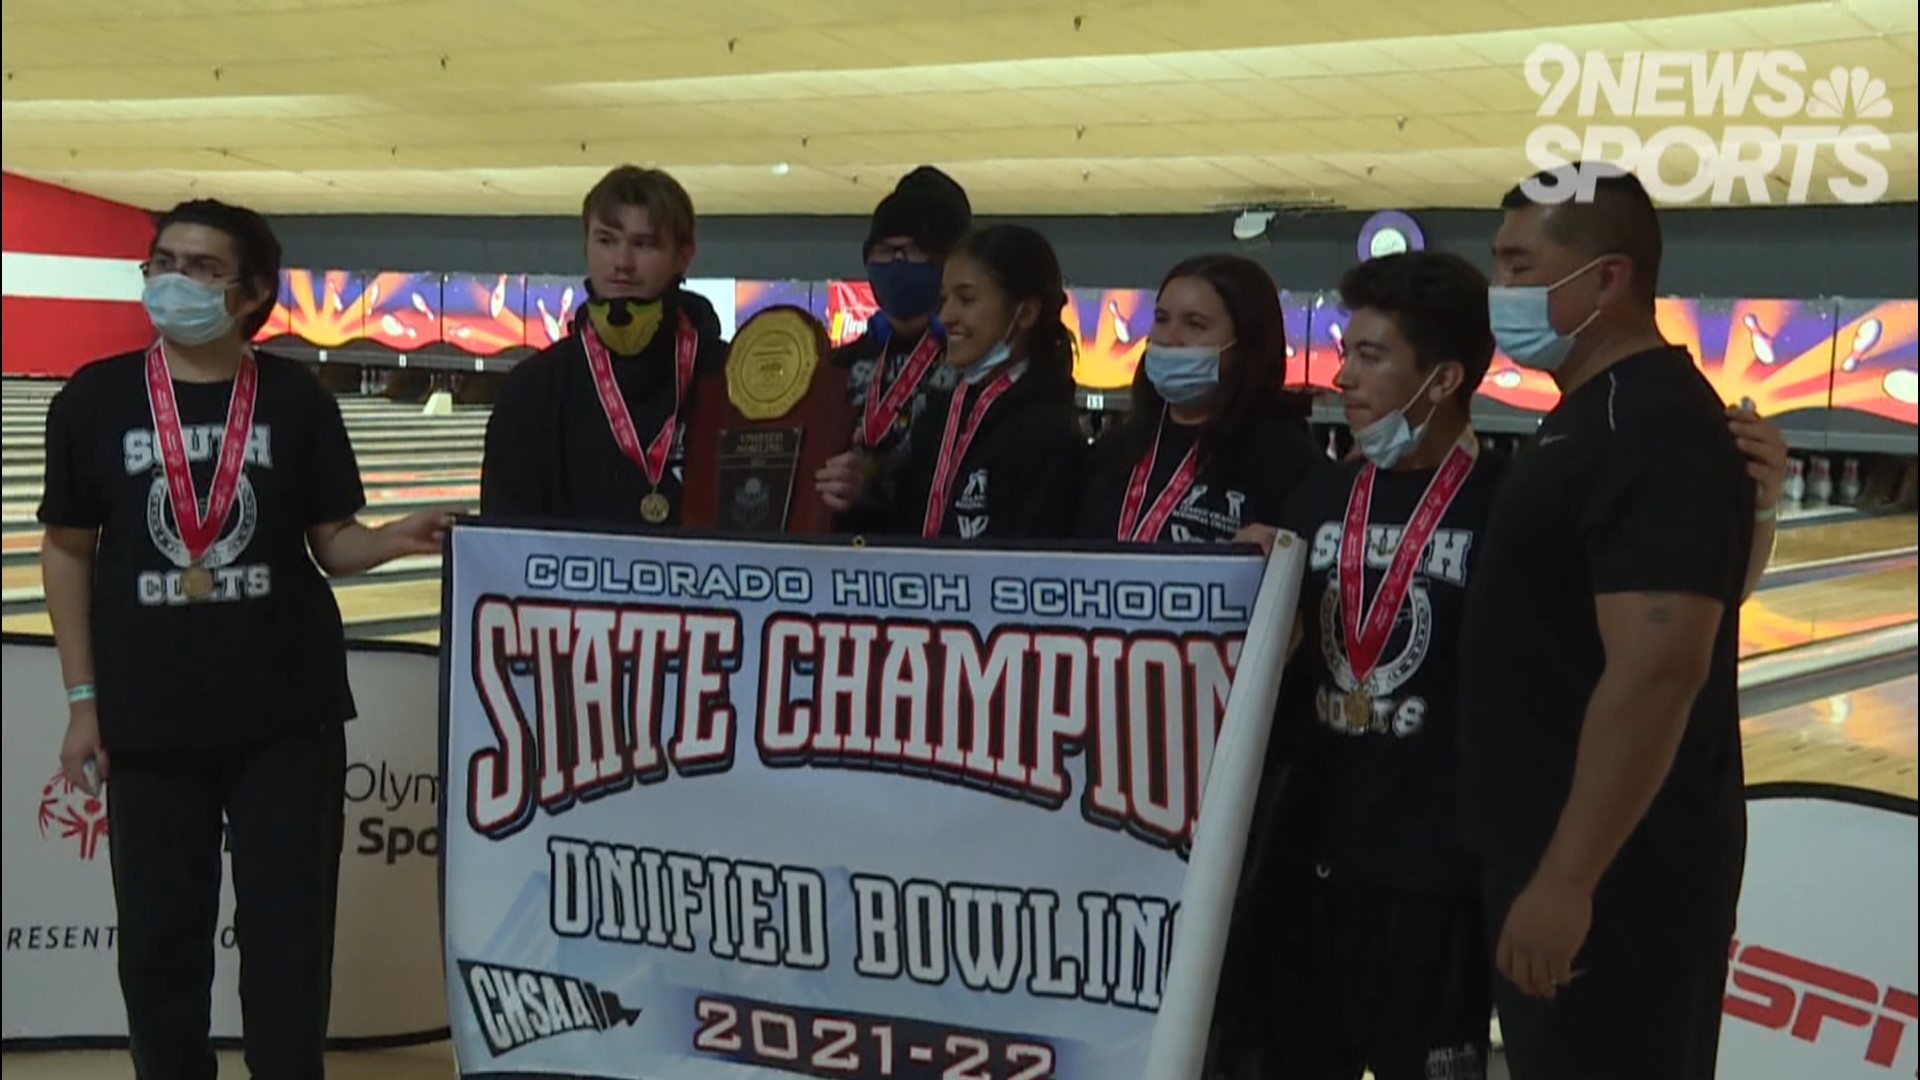 Pueblo South wins 2021 unified bowling state championship 9news